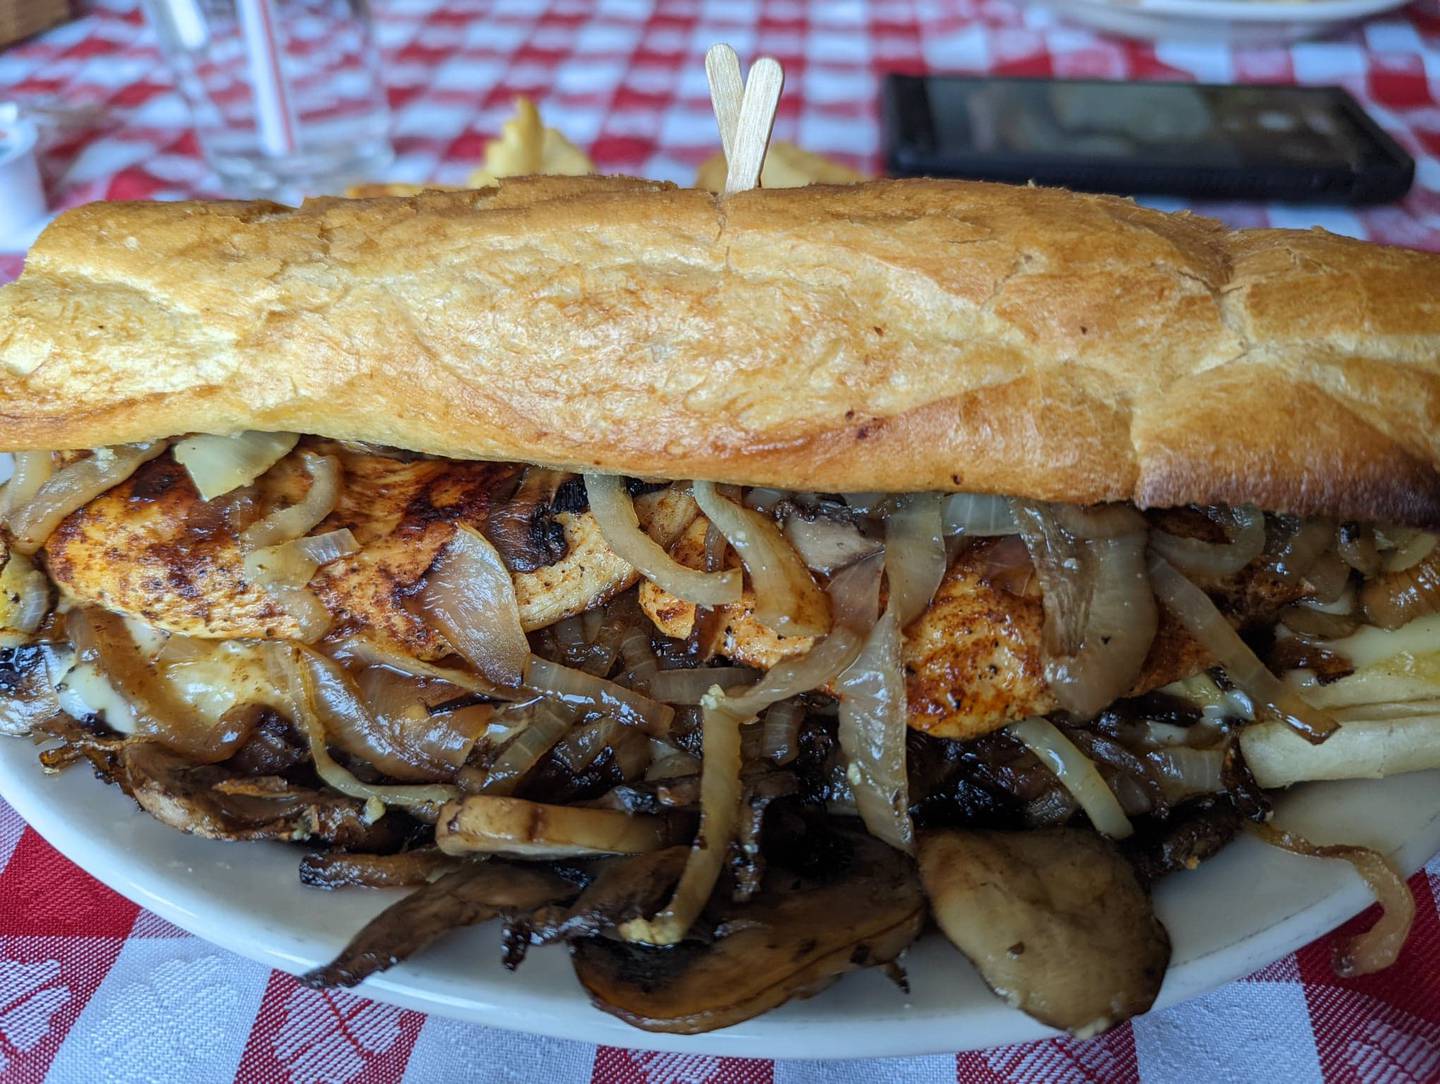 Merichka's in Crest Hill offers this grilled chicken variation of its classic cubed round steak poorboy. The grilled chicken was seasoned to perfection and it was generously topped with grilled onions and mushrooms.